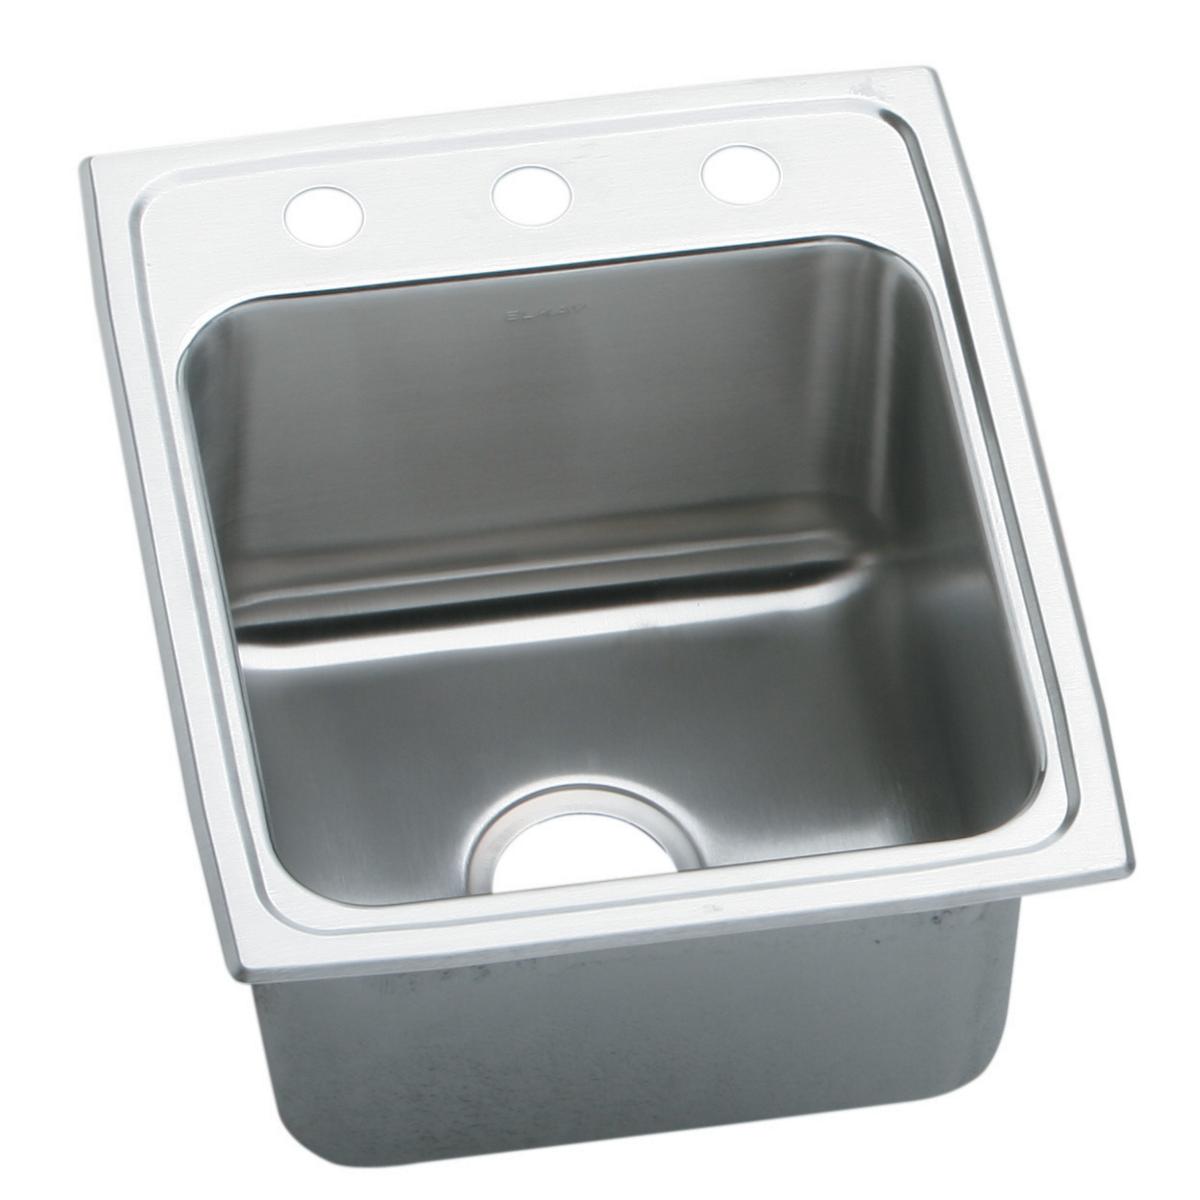 Elkay Lustertone Classic 17" x 22" x 10-1/8" Single Bowl Drop-in Sink with Quick-clip